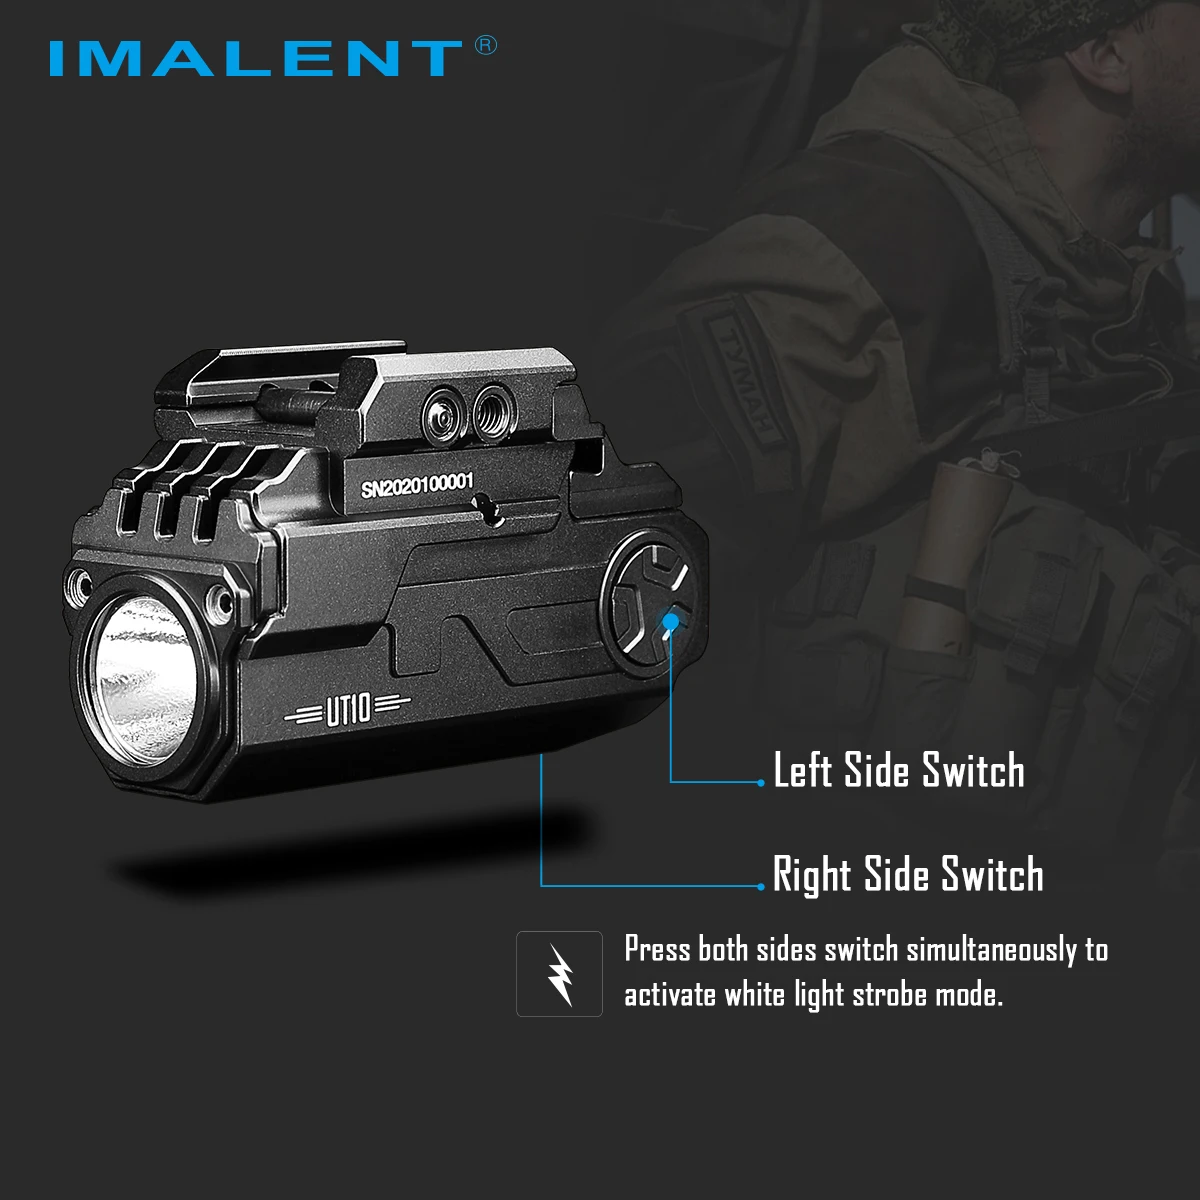 

IMALENT UT10 Tactical Flashlight Powerful LED 11600Lumen Hunting Light Torch USB Rechargeable Self Defense Outdoors Pickani